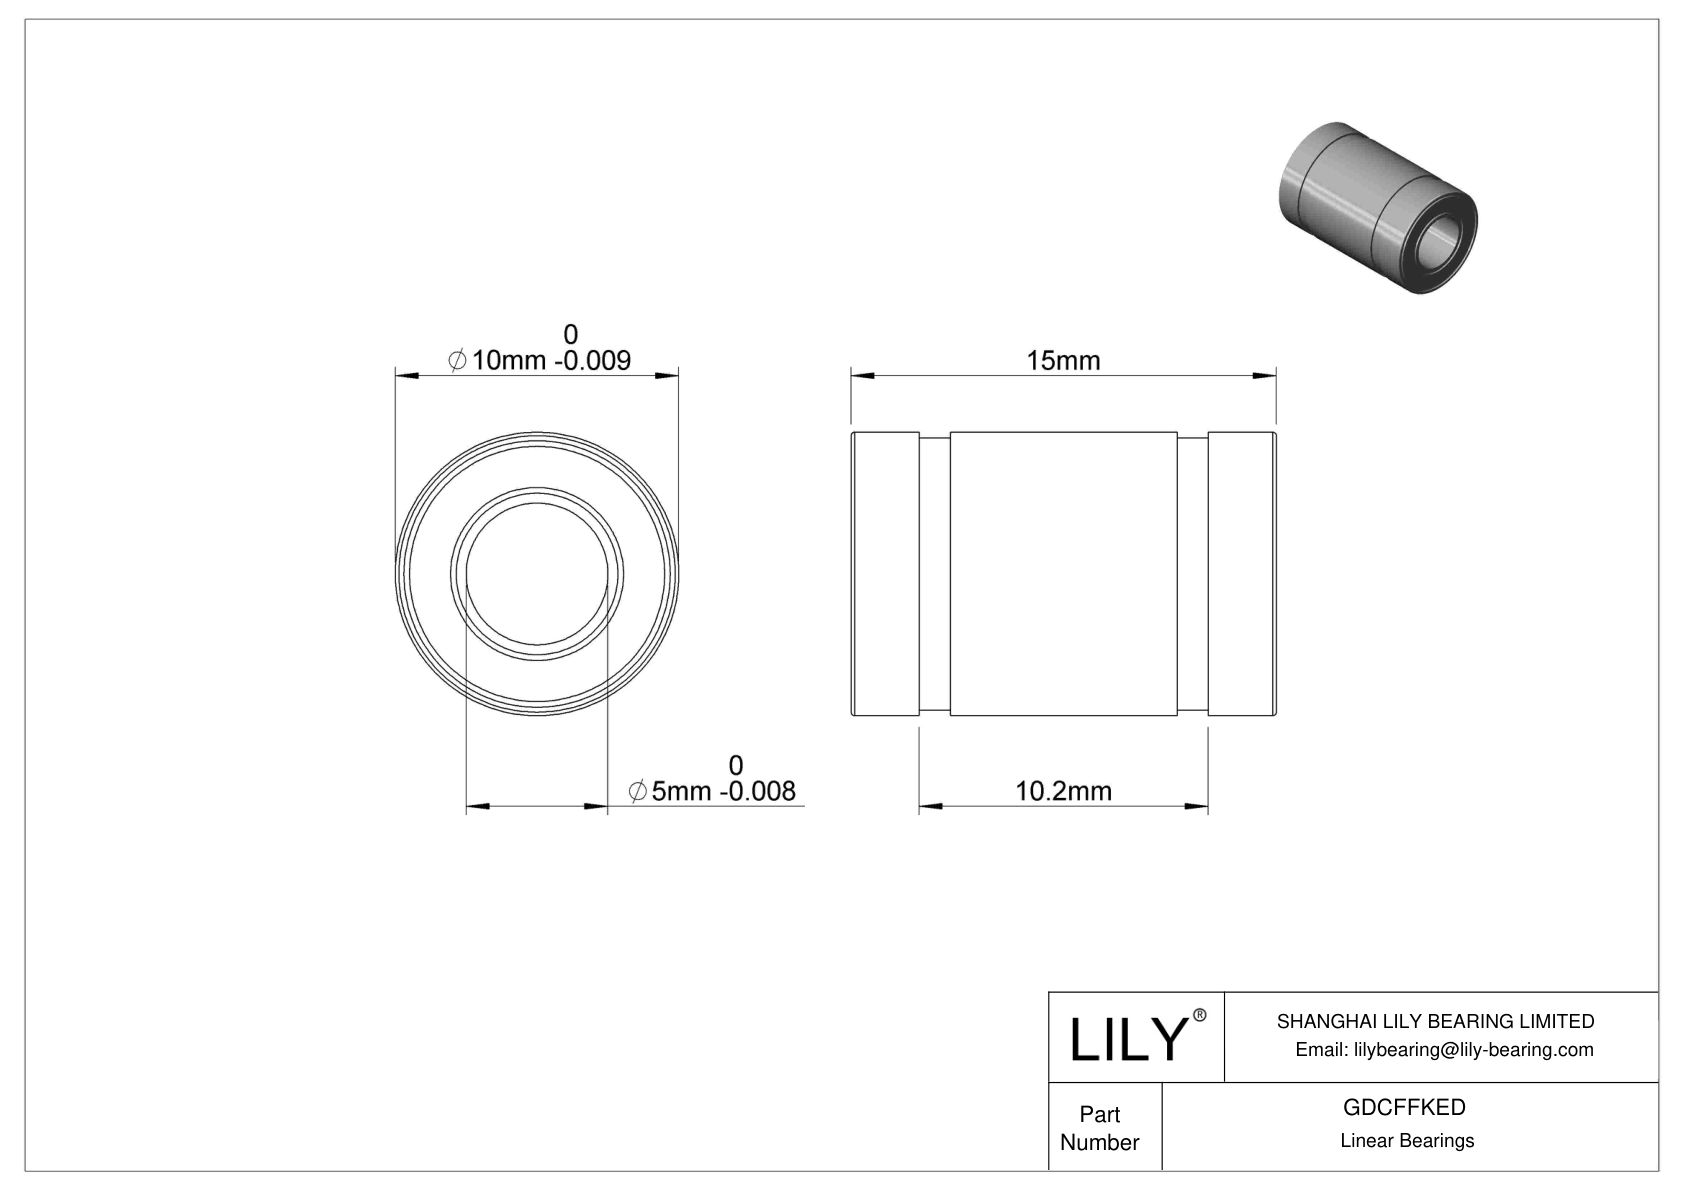 GDCFFKED High-Temperature Linear Ball Bearings cad drawing